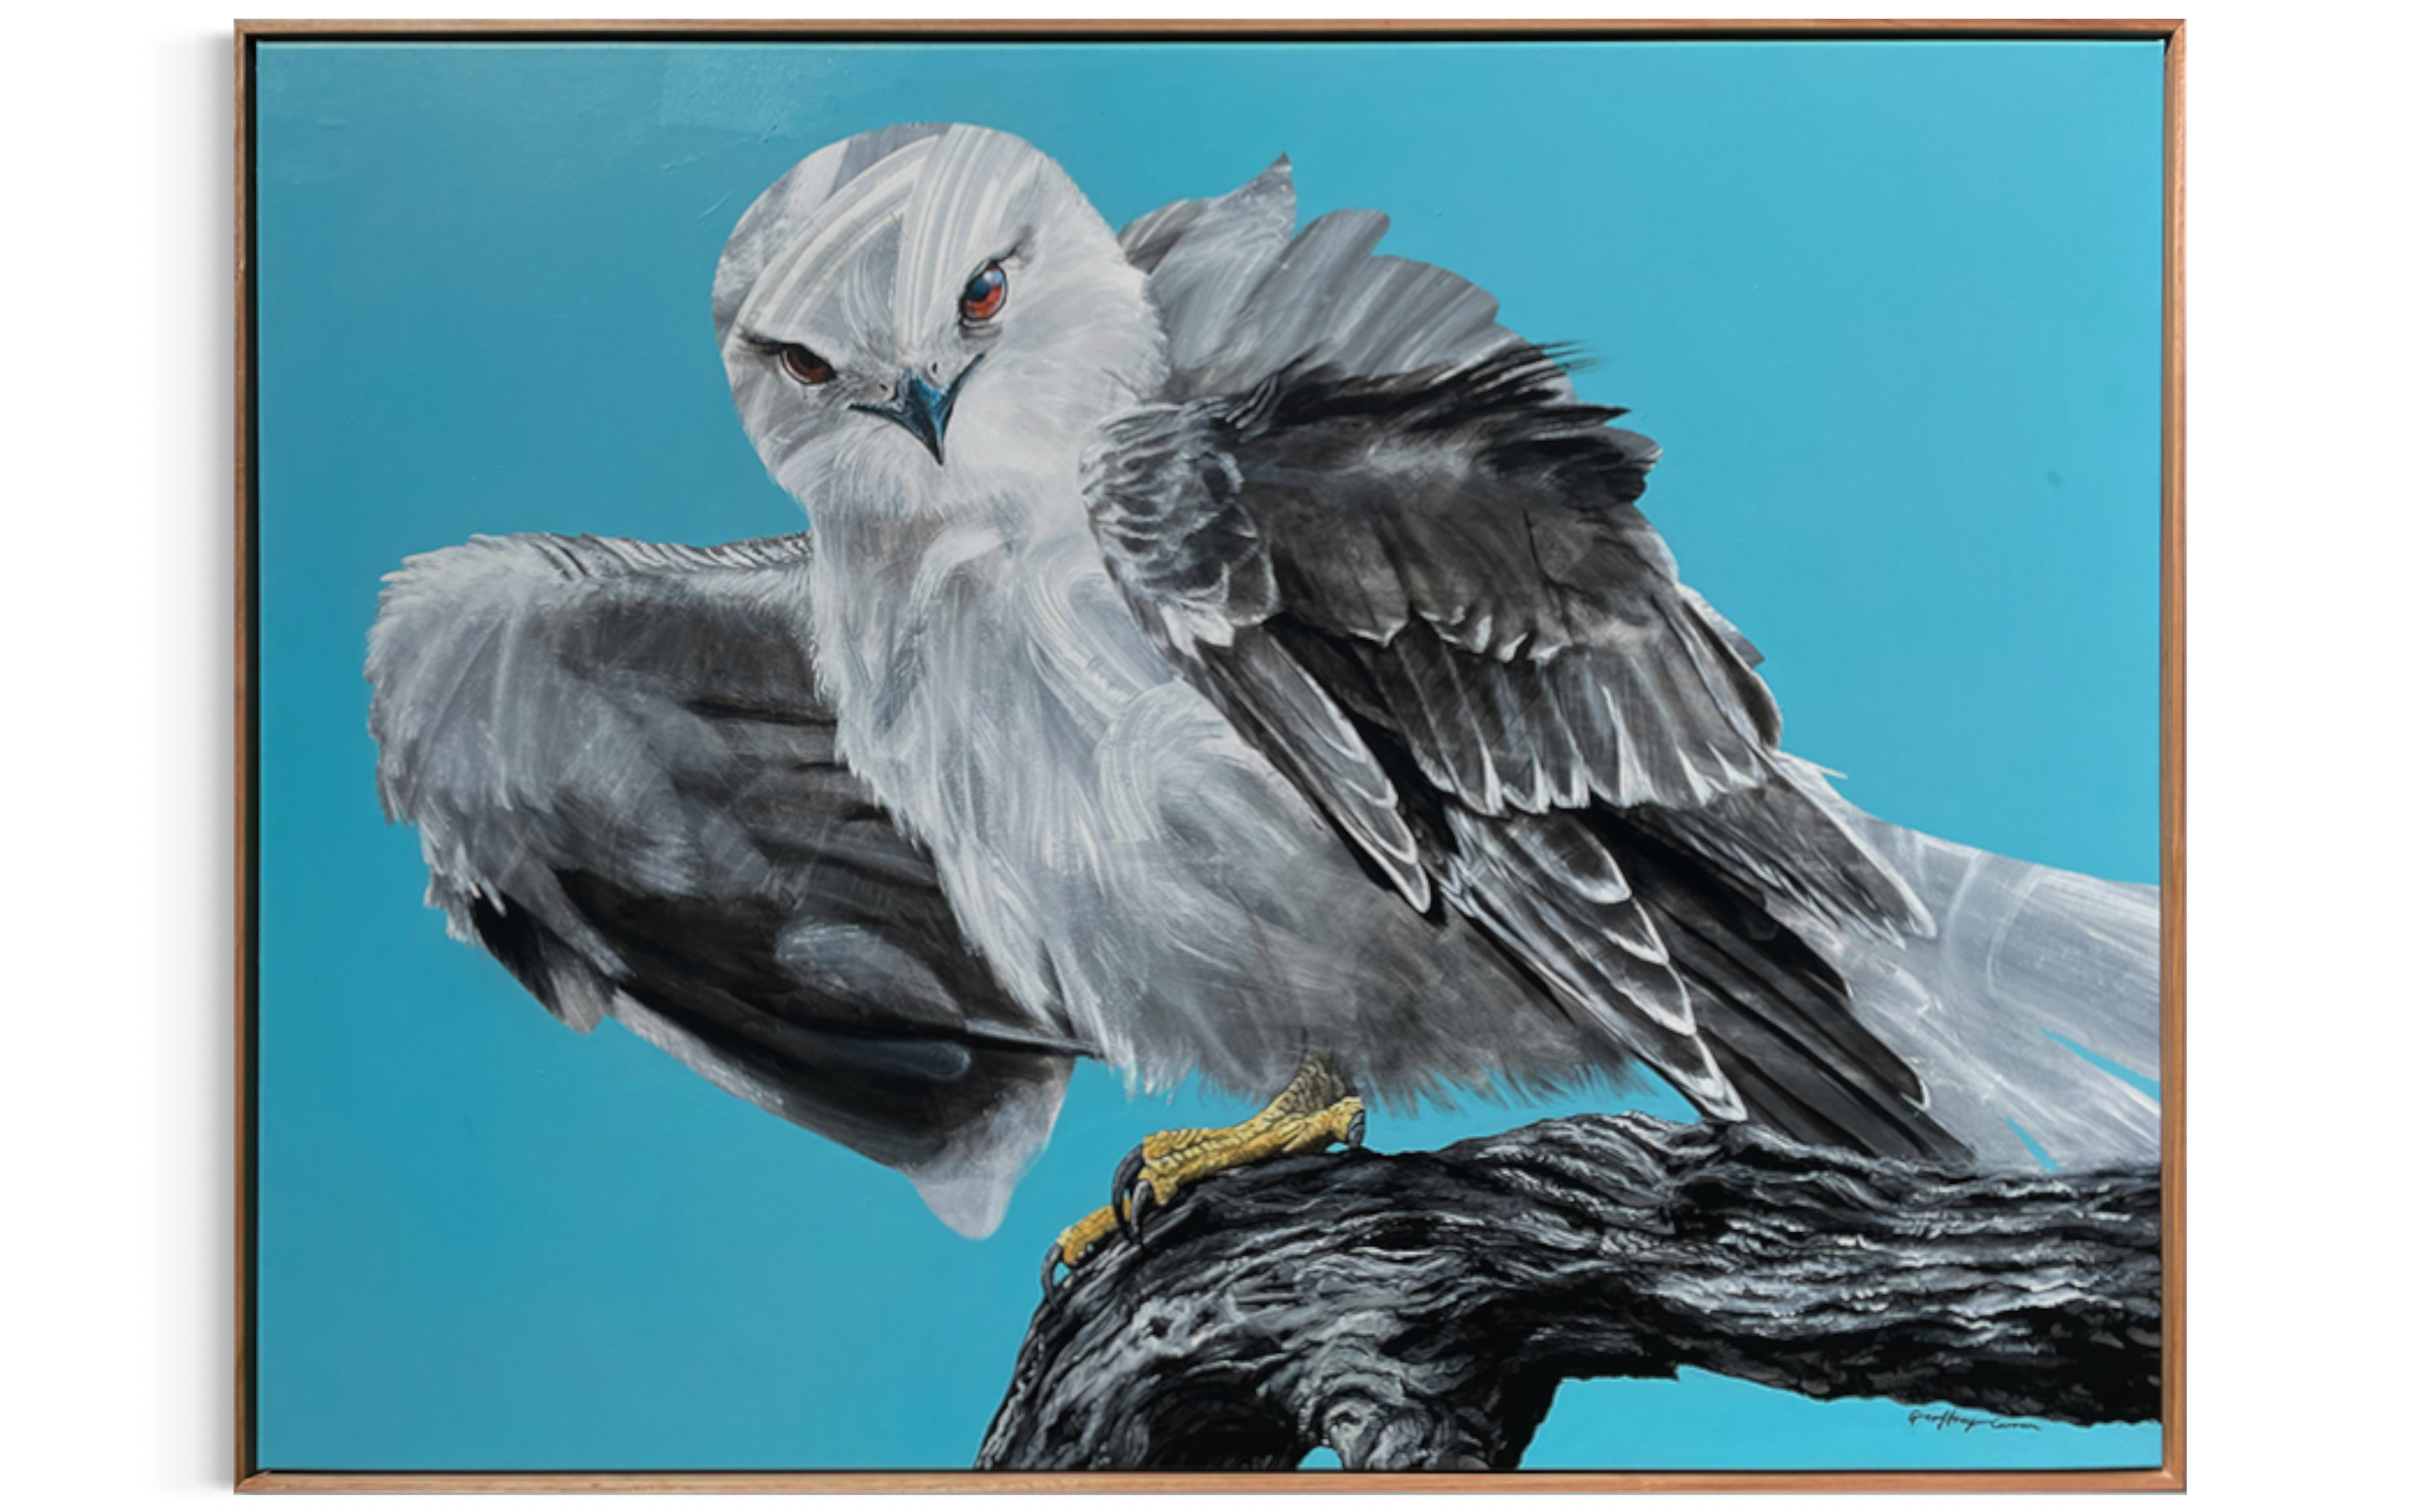 Photo of Geoffrey Carran's Painting of a Black Shouldered Kite hanging on a gallery wall, It has a sky blue background and is painted in fast loose brush stroks with highly detailed elements such as the eyes, beak and feet.